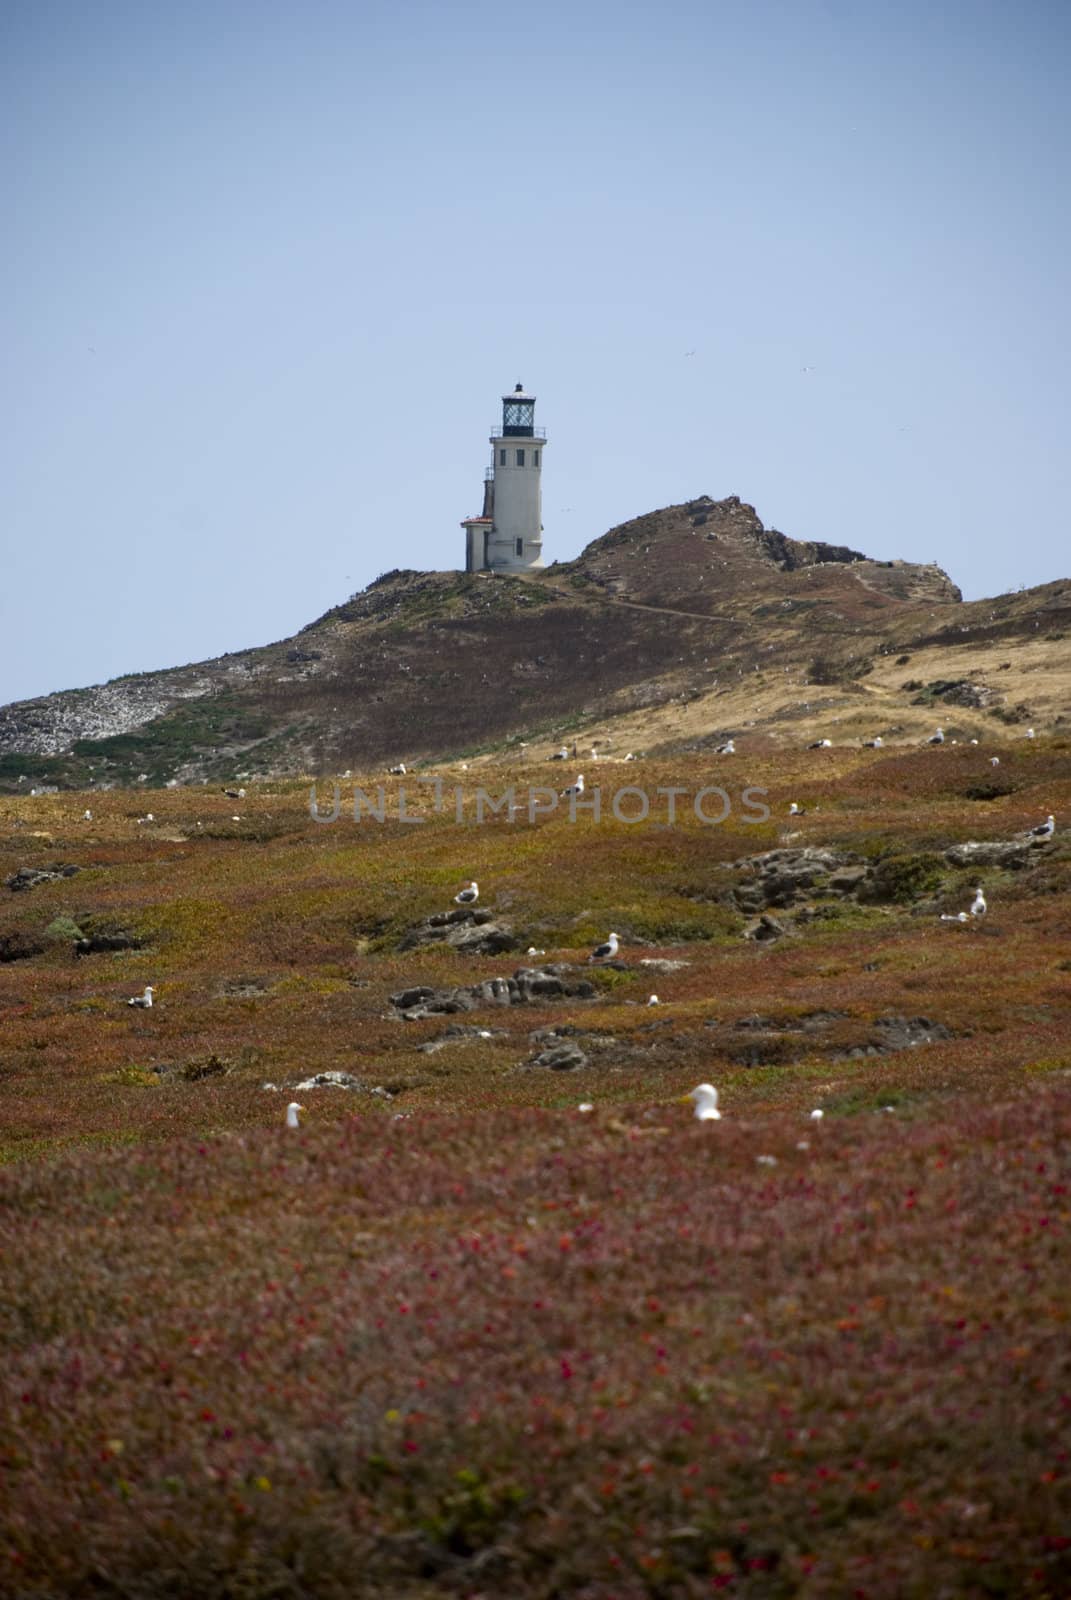 Anacapa lighthouse and flower field